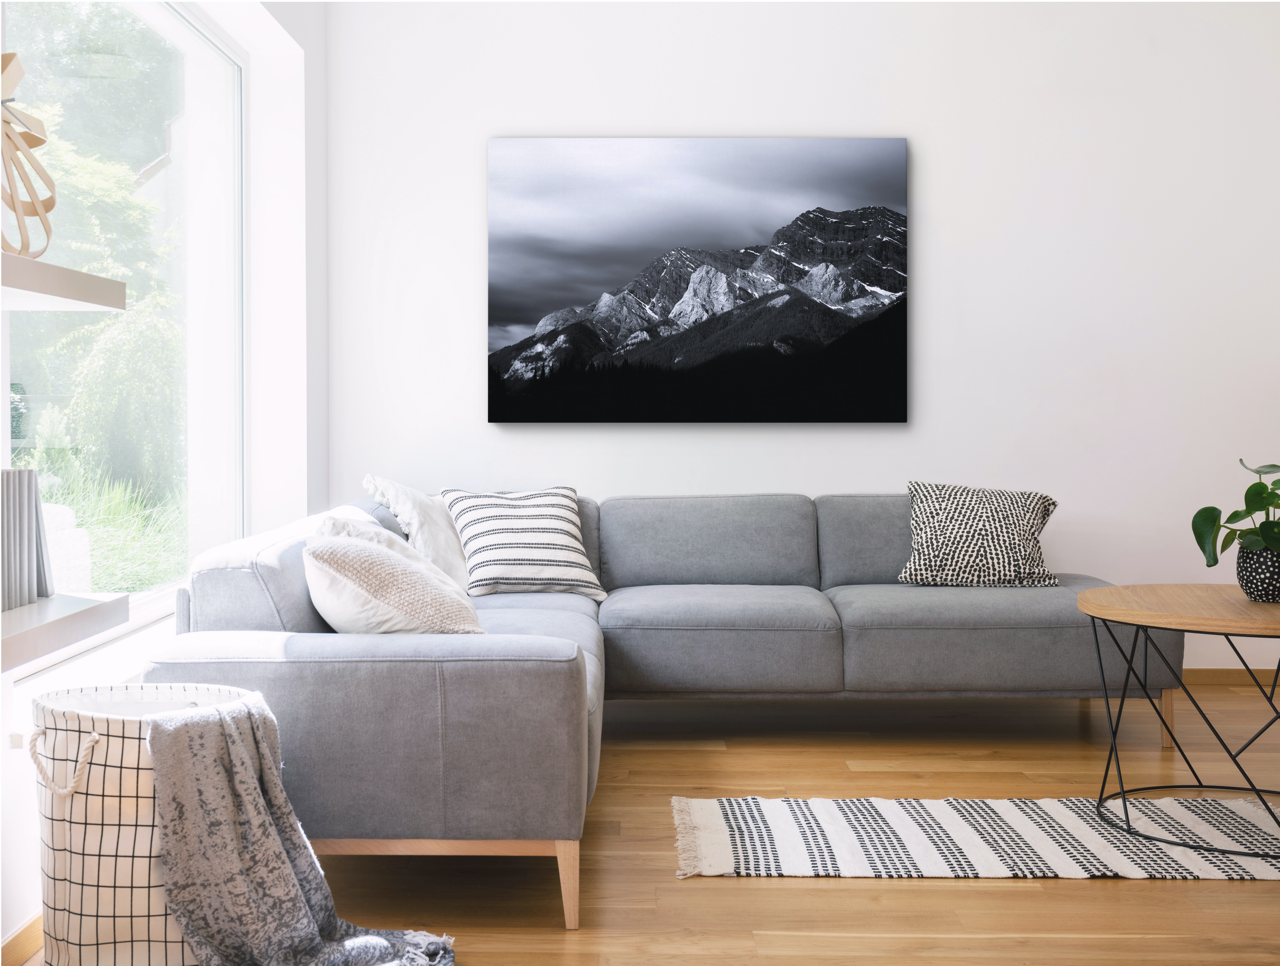 Black and White Snowy Mountain Art over Couch